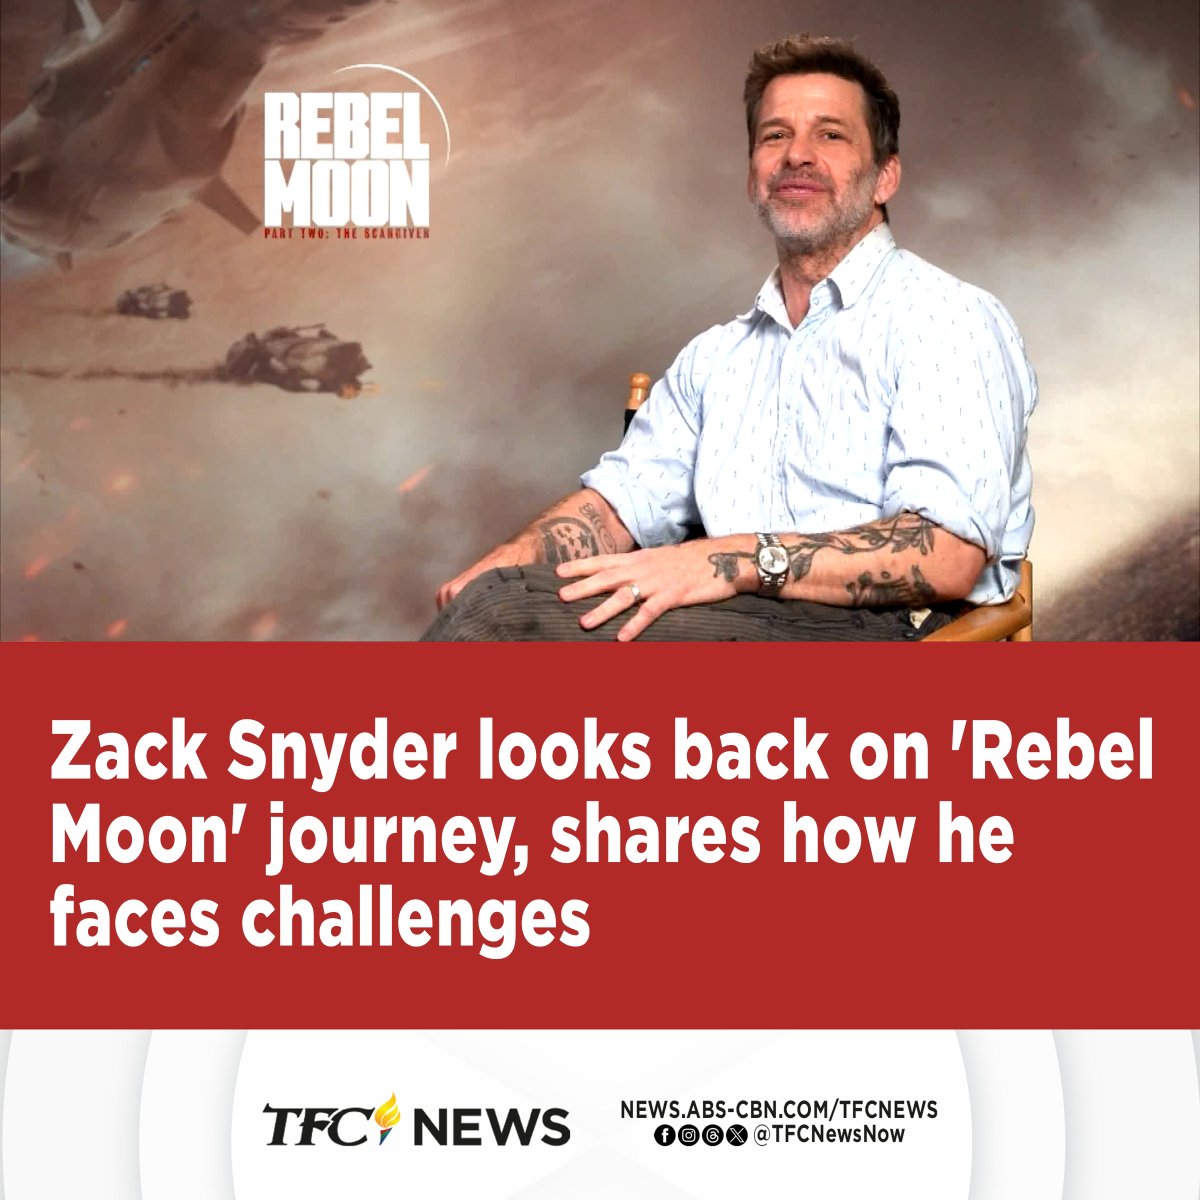 The conclusion of Zack Snyder's sci-fi story 'Rebel Moon' arrives on streaming this week. Snyder talks to @YongChavezLA about the decades-long effort to bring the film to life – and what the audience can expect in its director's cut. youtu.be/jpIF0R18nEI